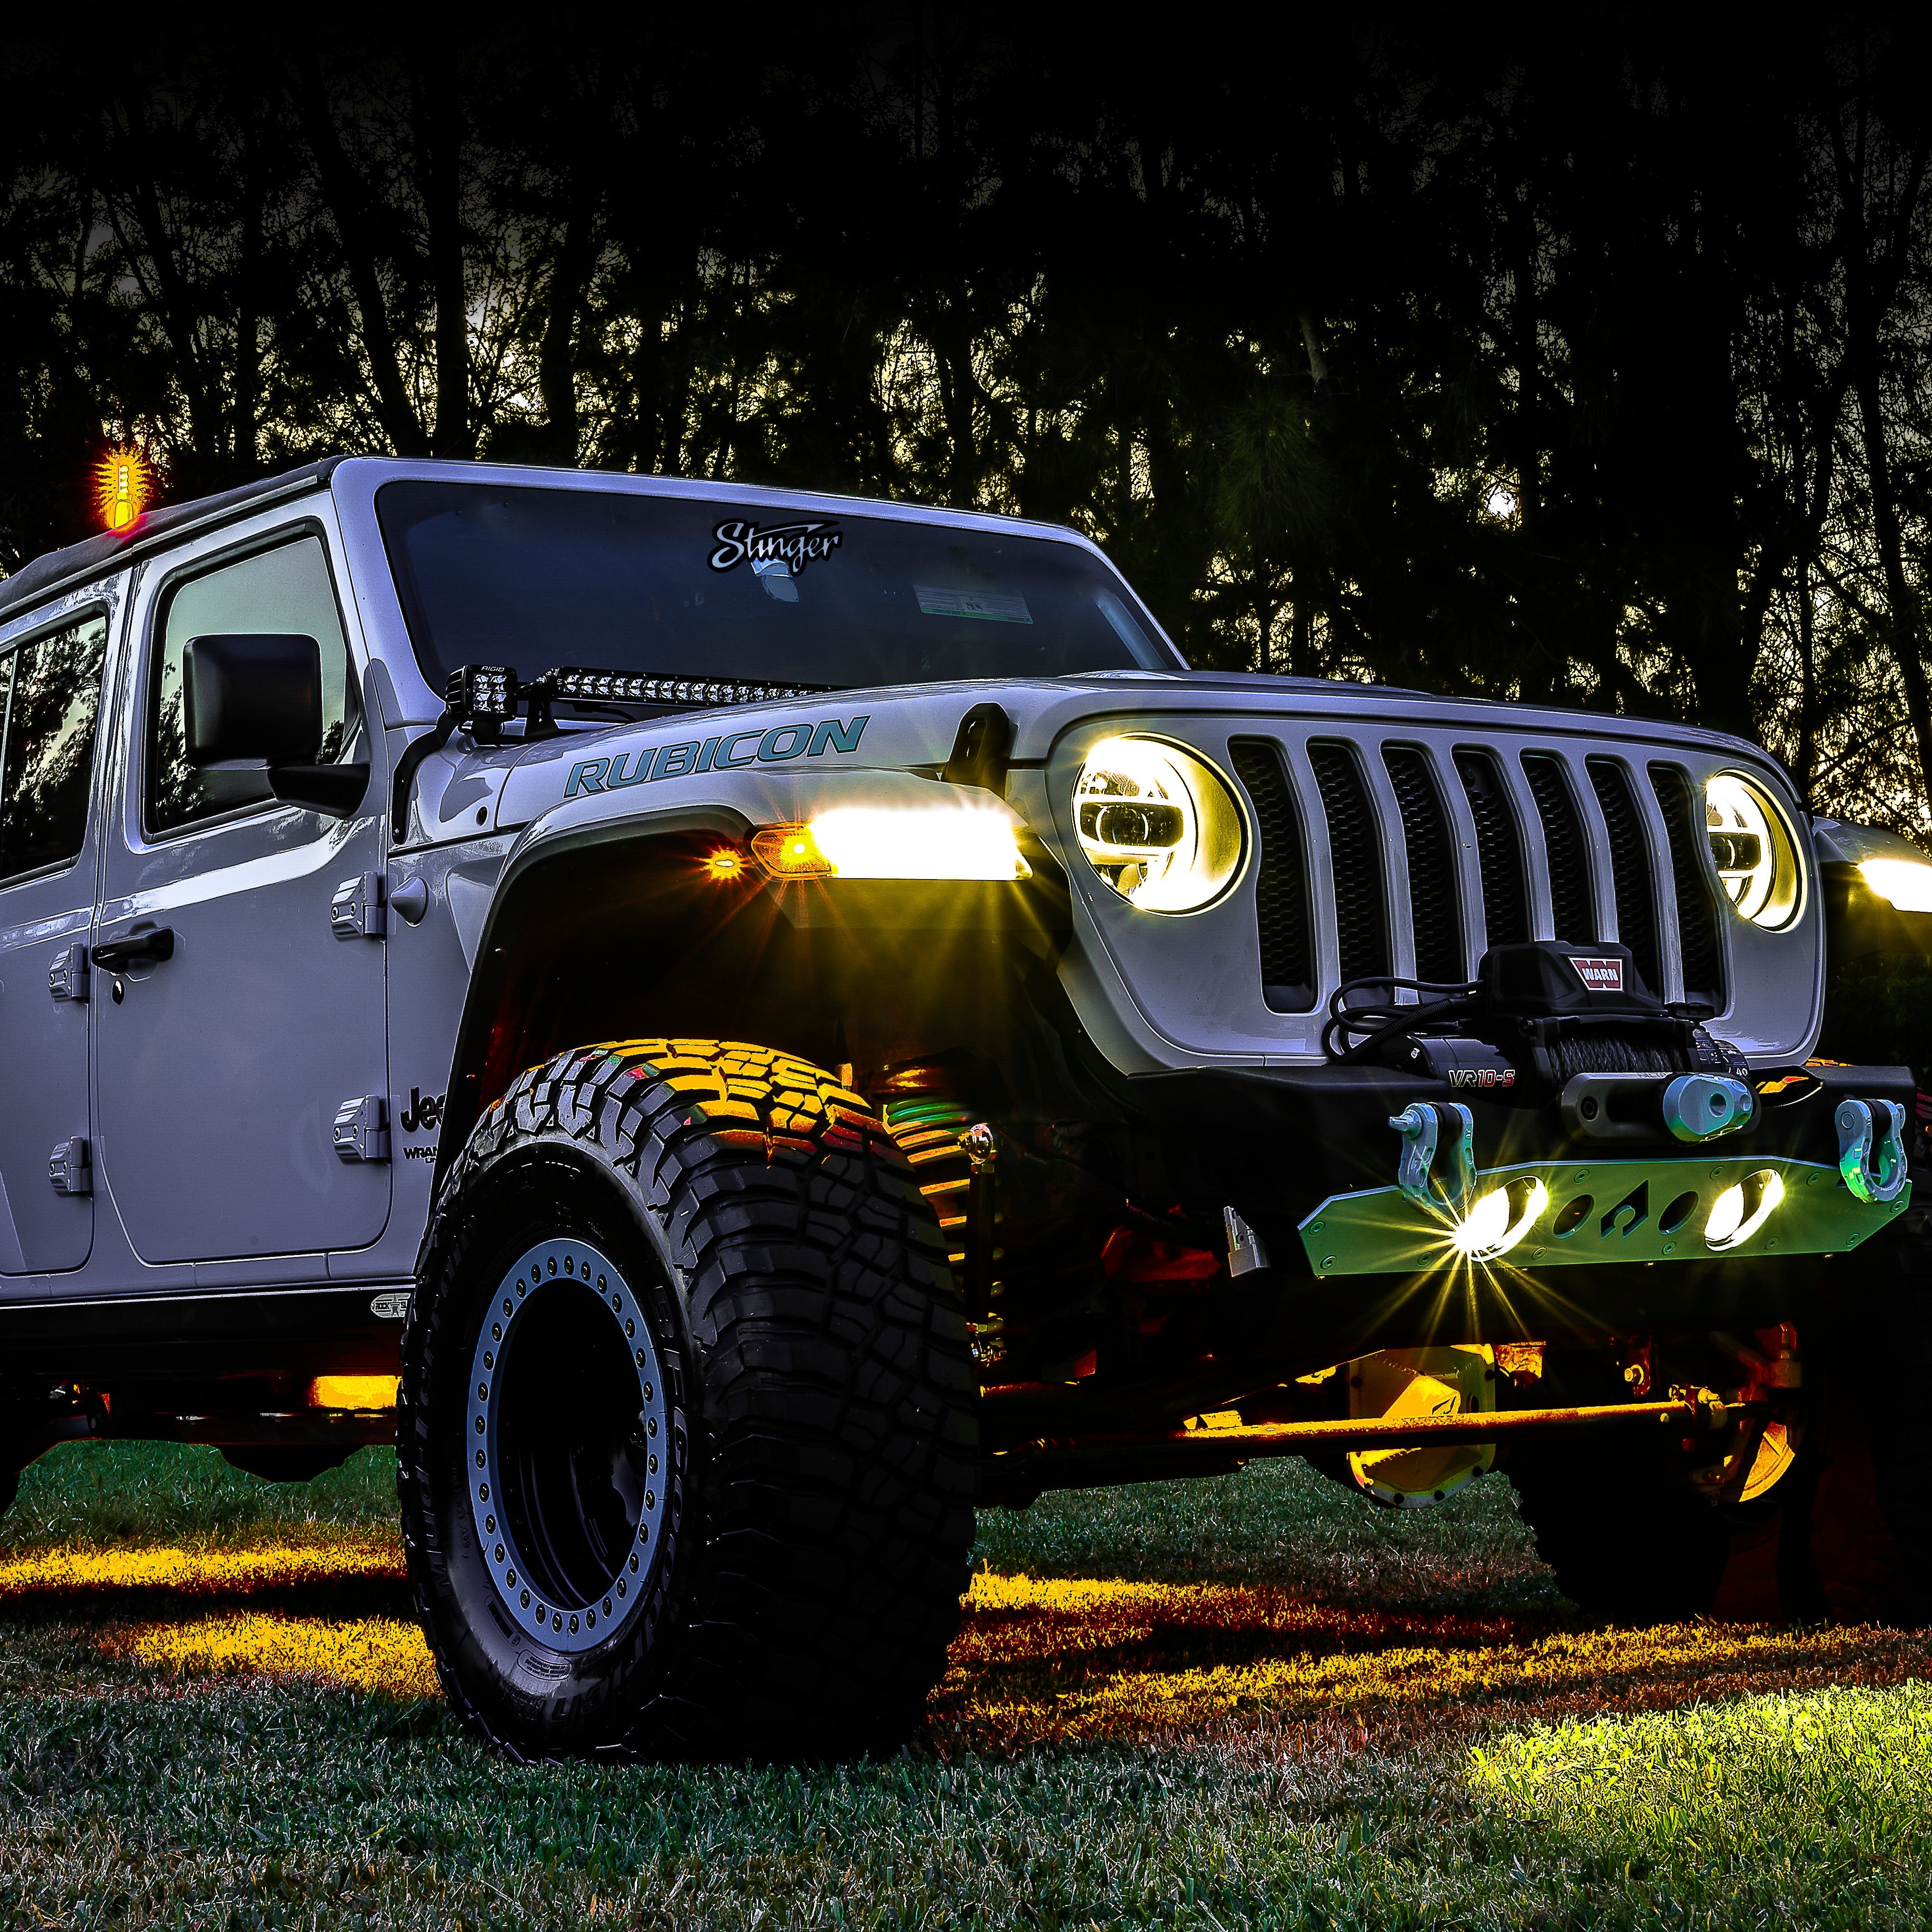 Multi-color RGB-W Rock Lights for Off-roading